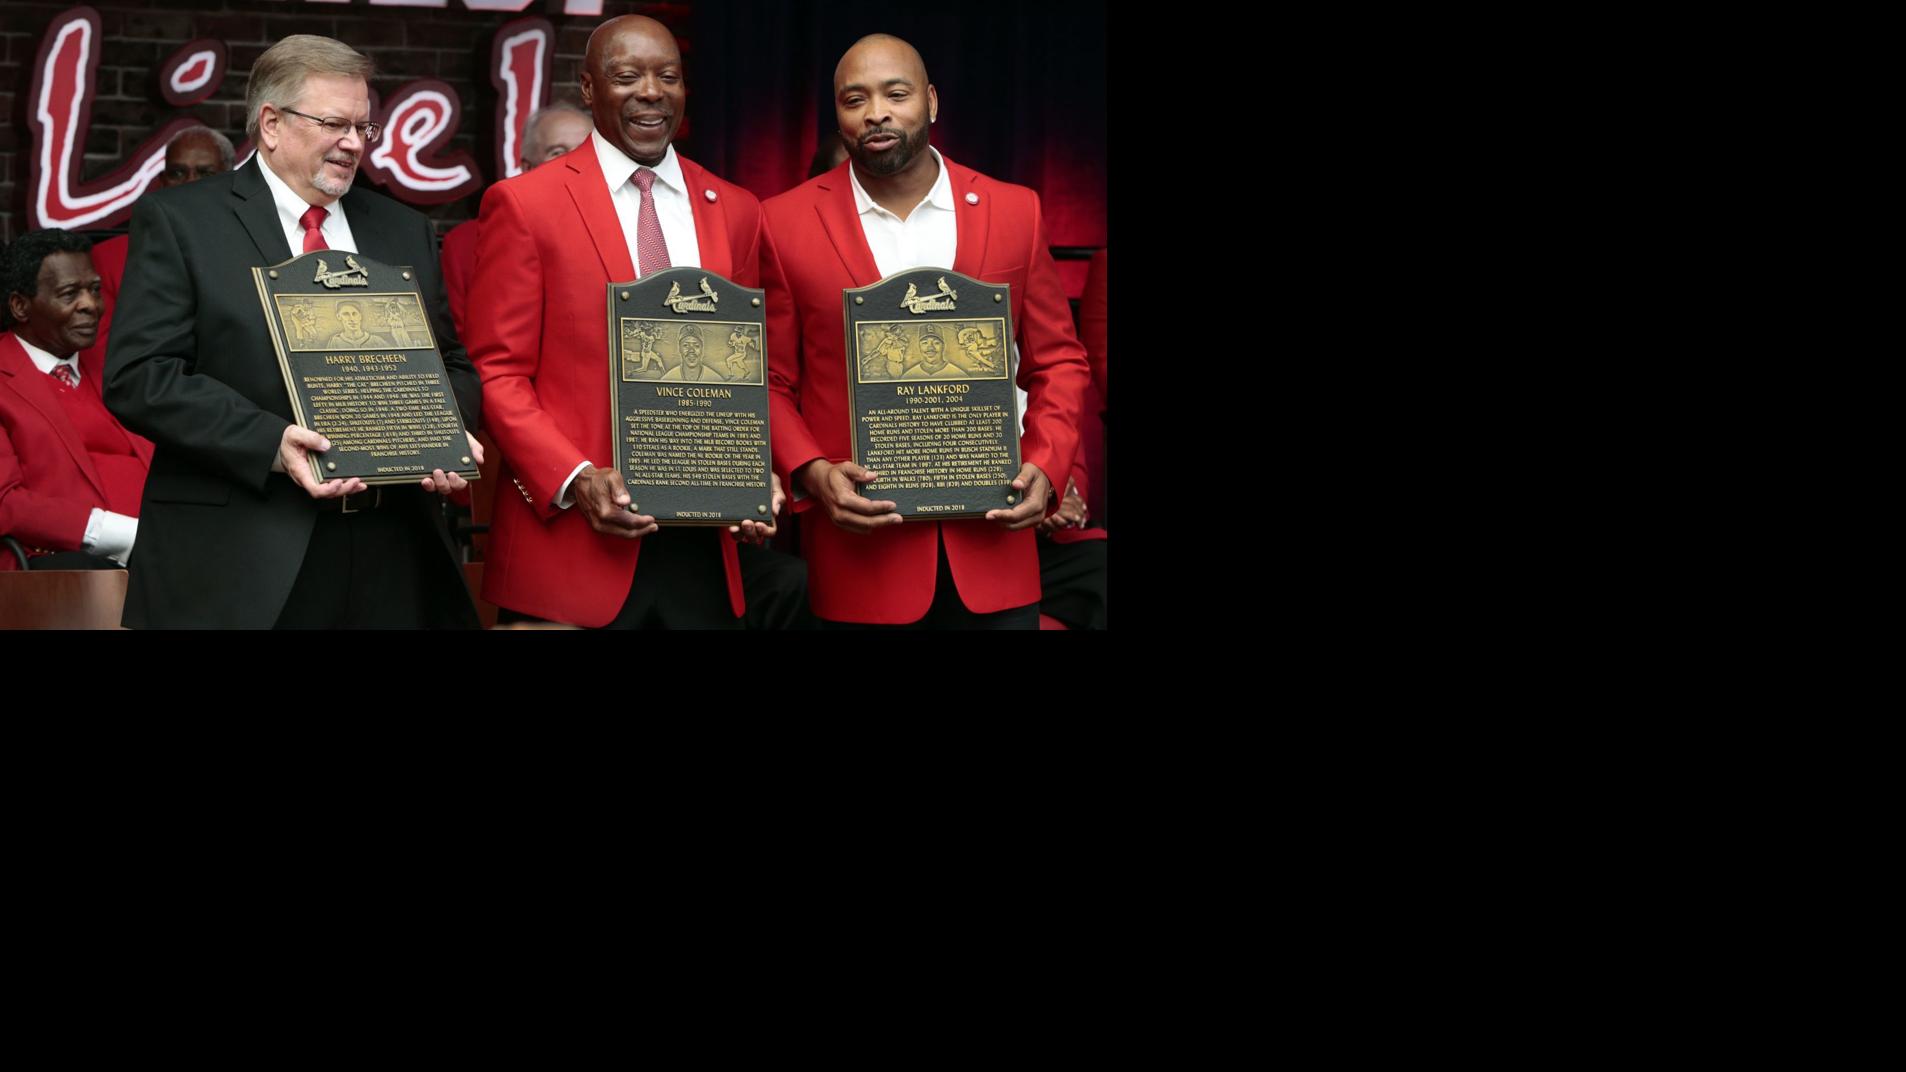 Emotional day for Cardinals' Hall of Fame inductees St. Louis